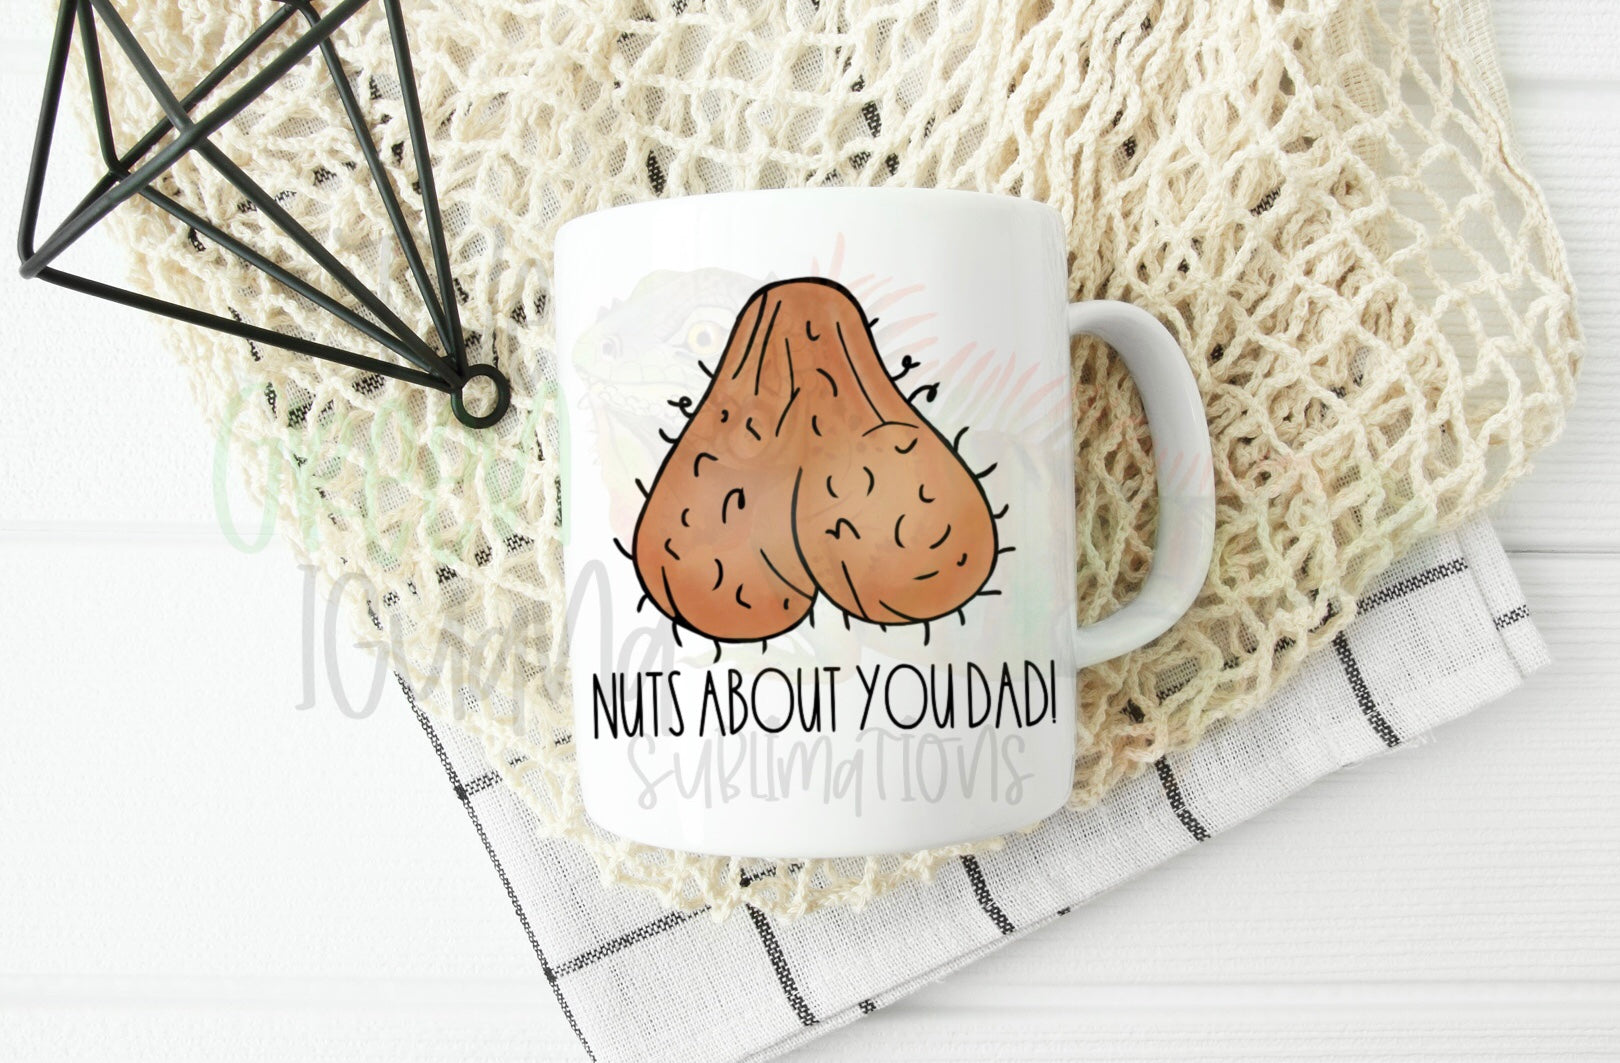 Nuts about you dad! - DTF transfer